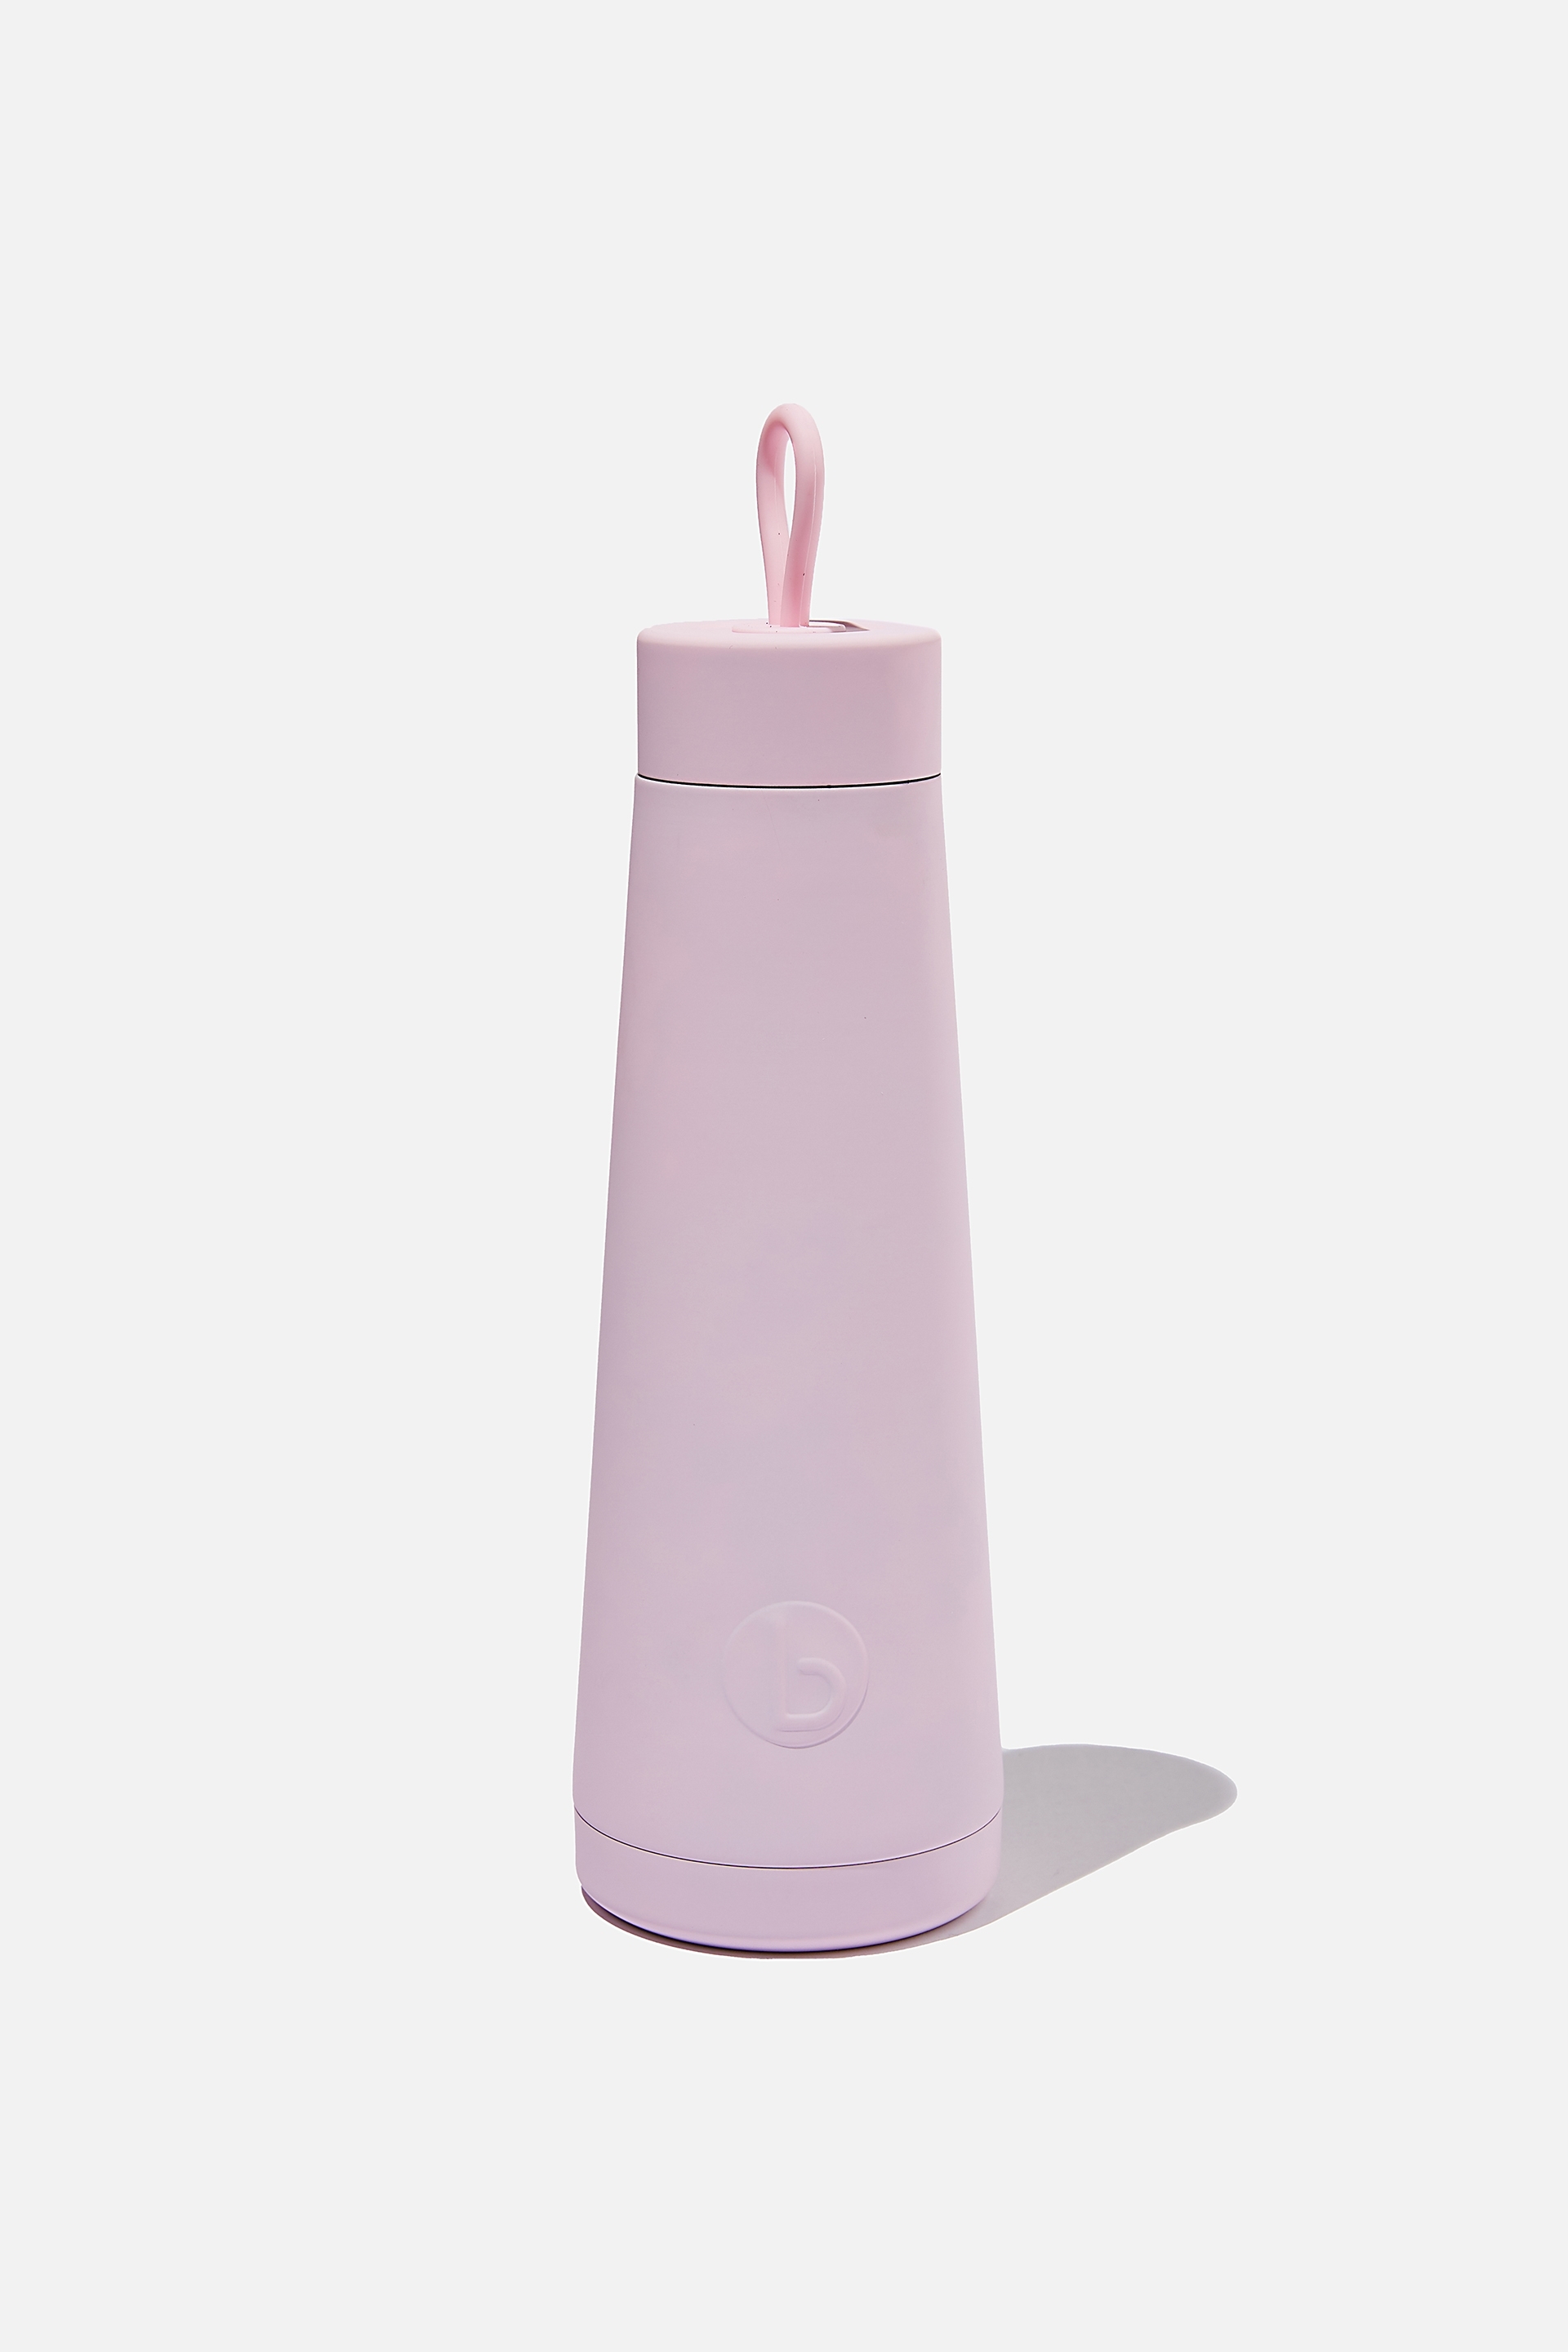 Body - Chill Out Drink Bottle - Cotton candy